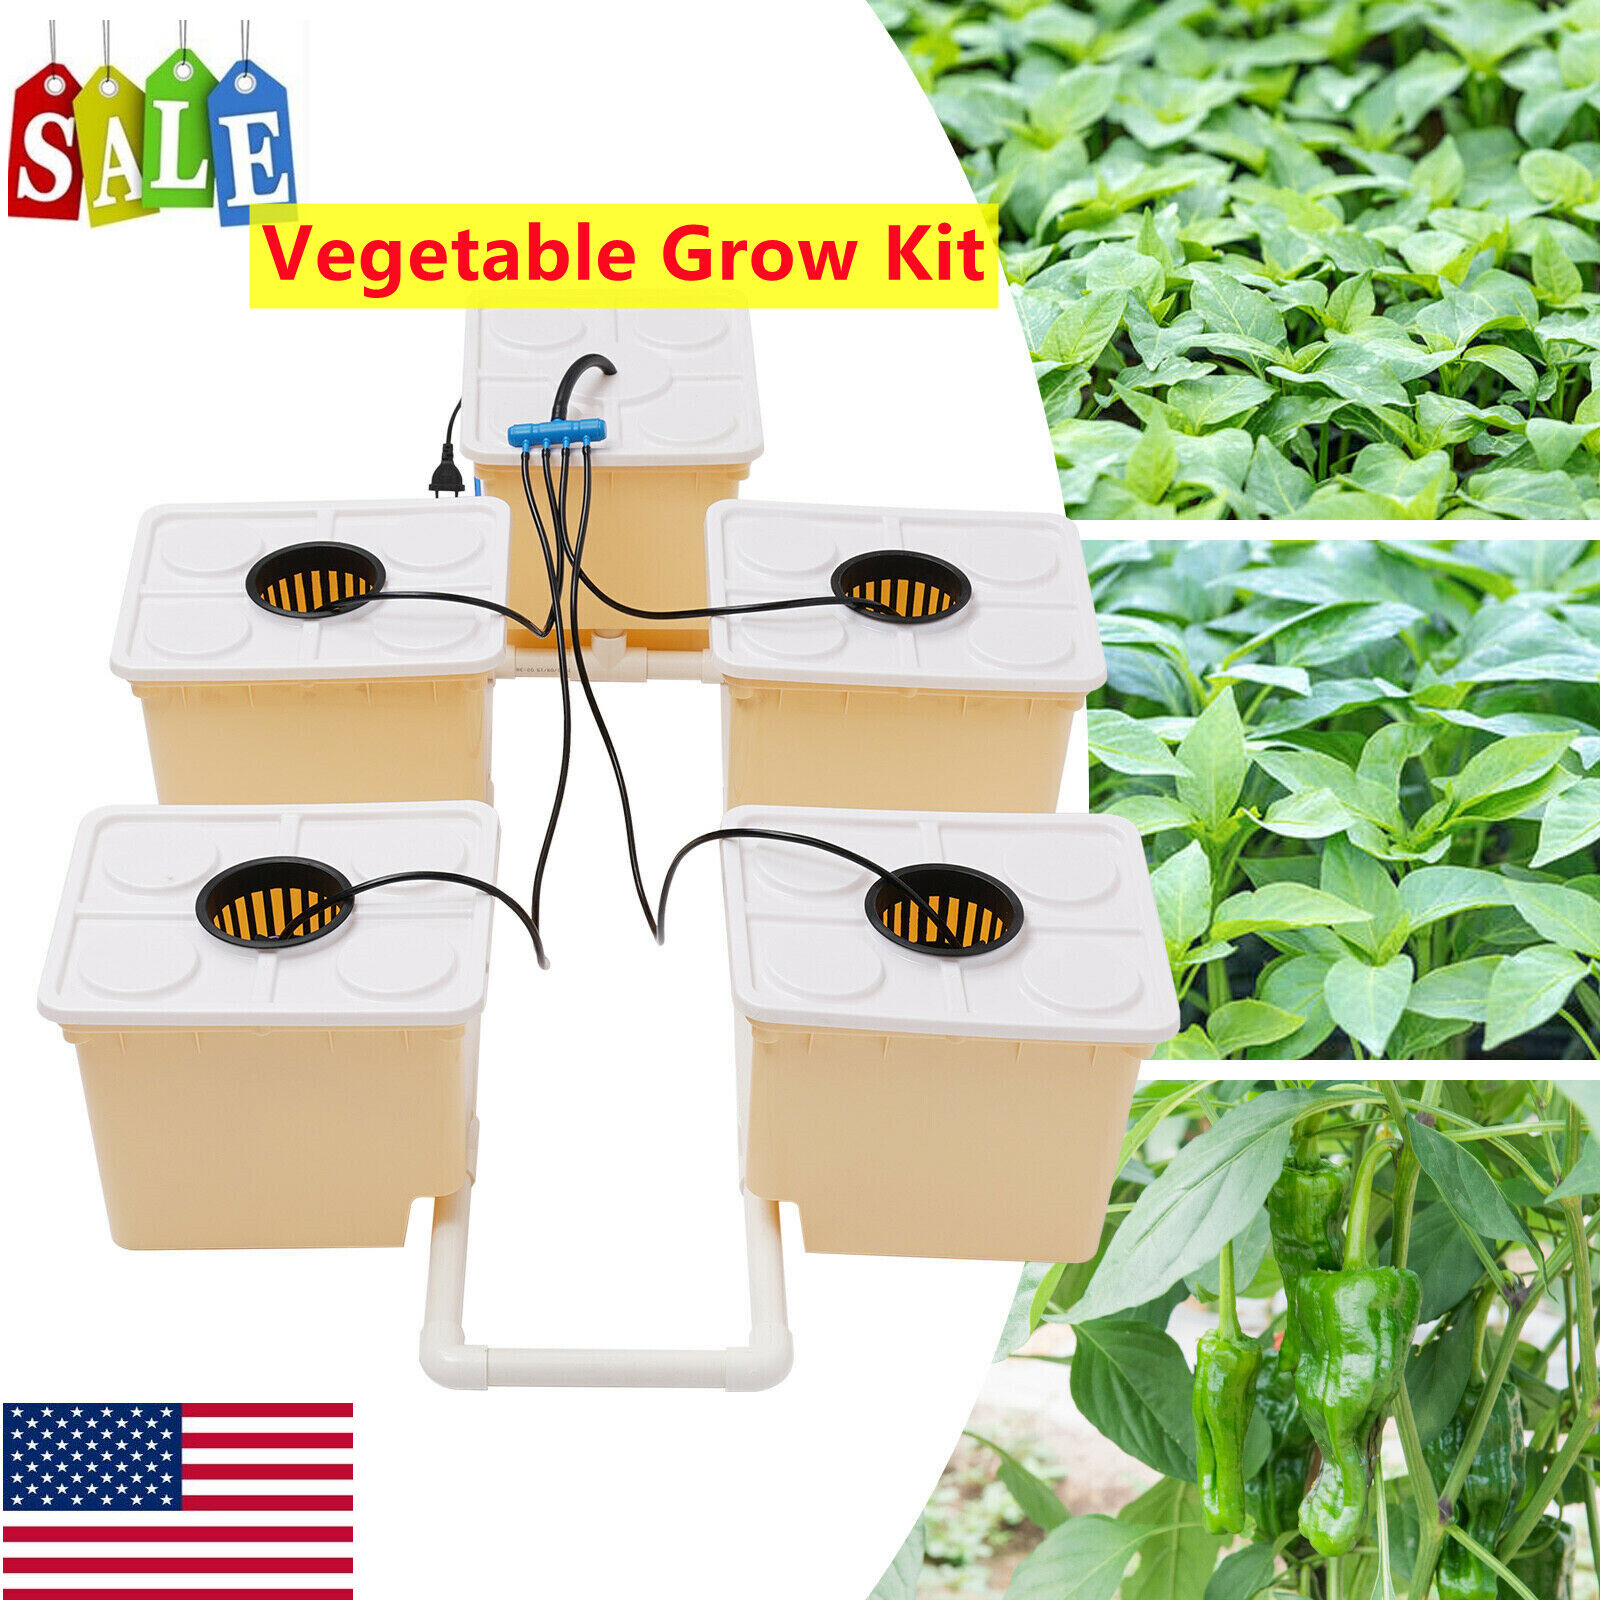 Hydroponic Deep Water Culture (DWC) & Drip Ring Grow System Kits All Included